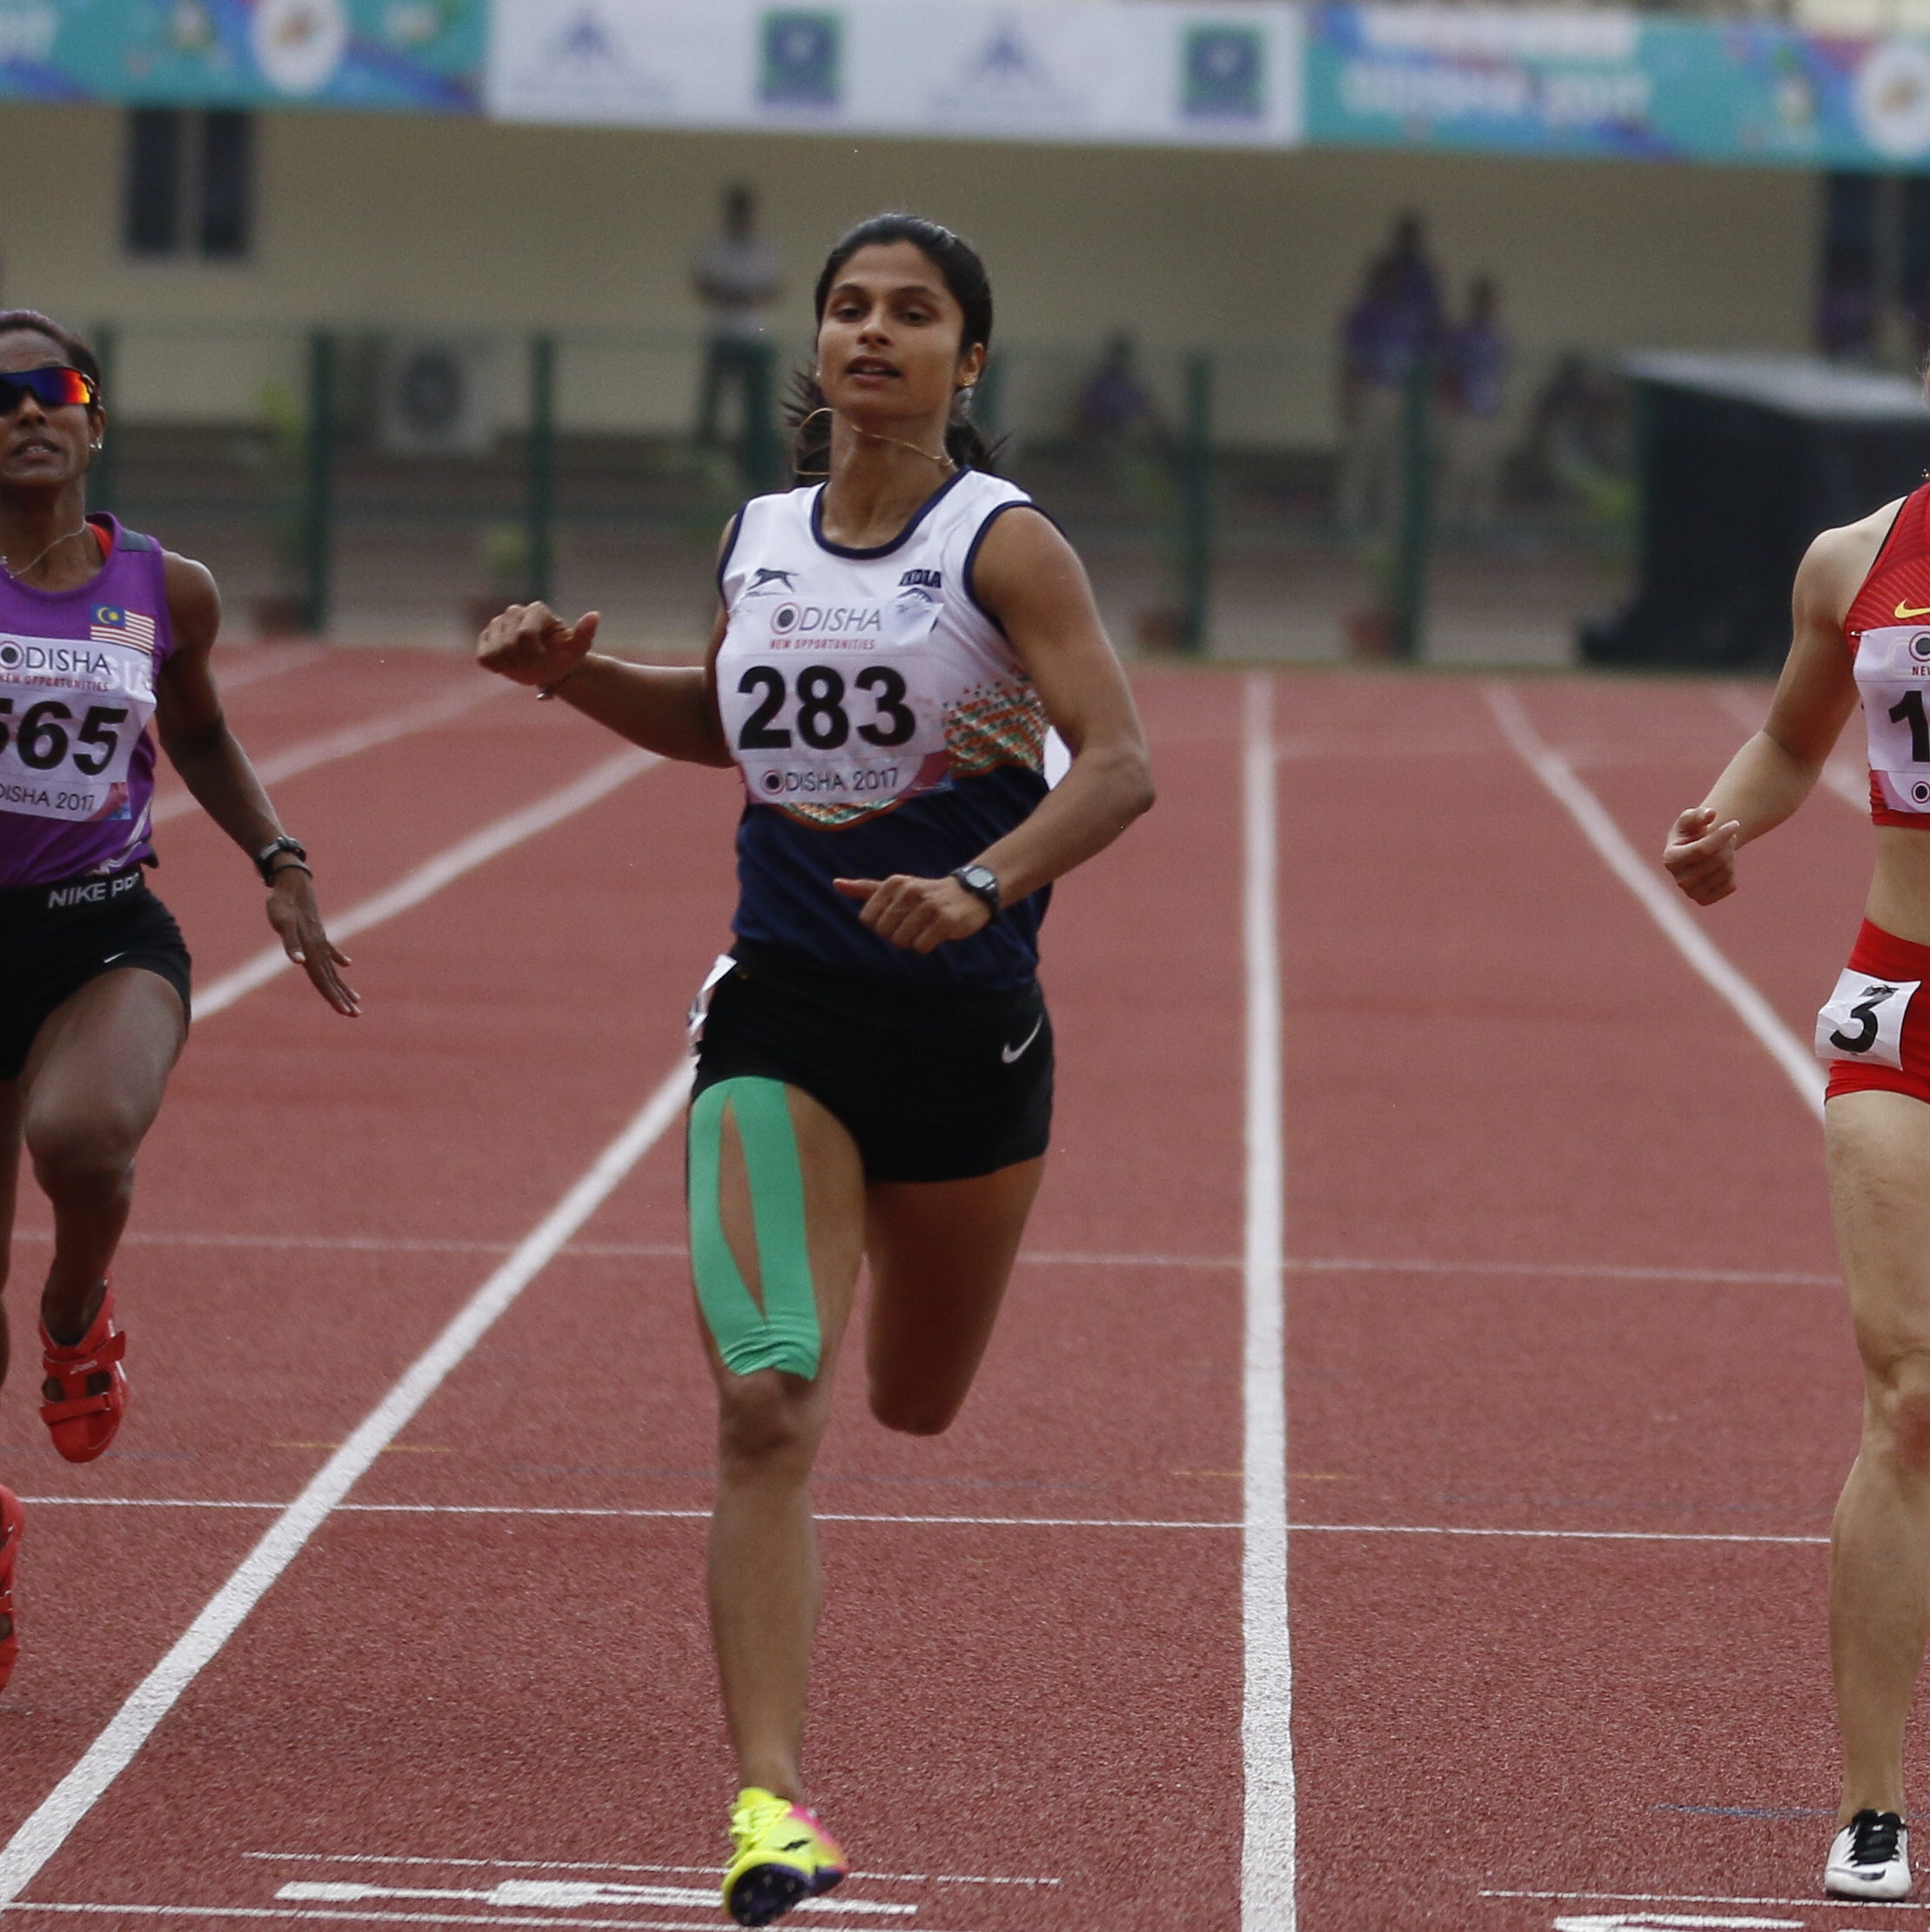 Sprinter Srabani Nanda becomes first Indian to return to competition post Covid-19 sabbatical 